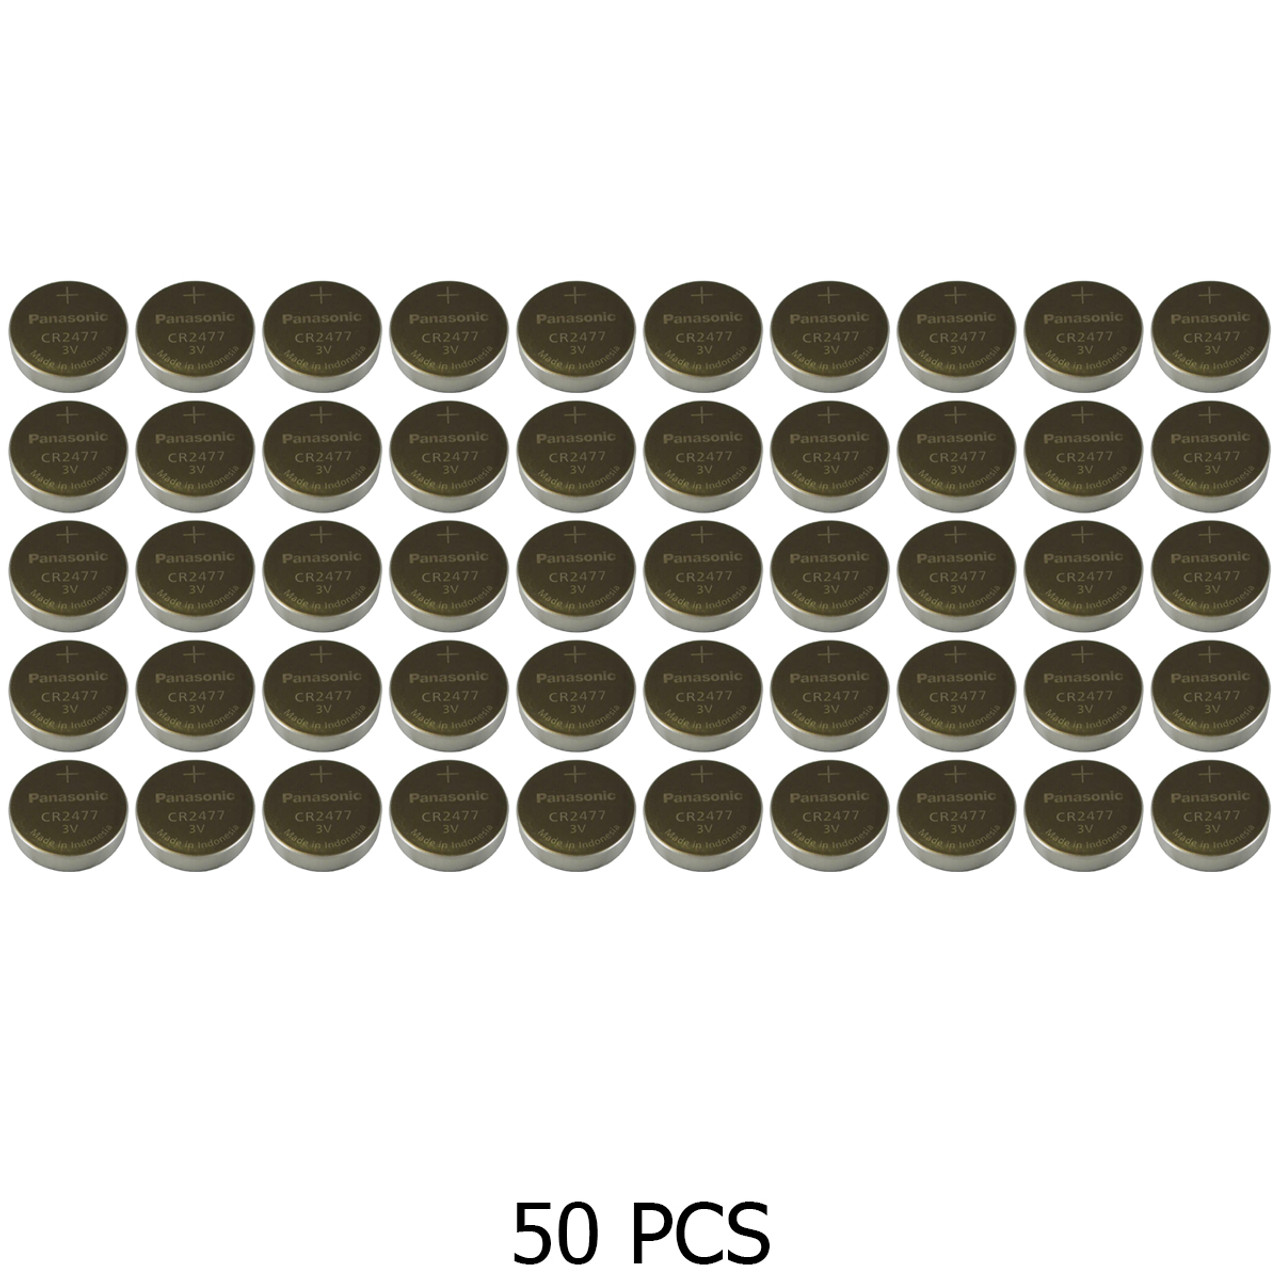 50-Pack Panasonic CR2477 3 Volt Lithium Coin Cell Batteries